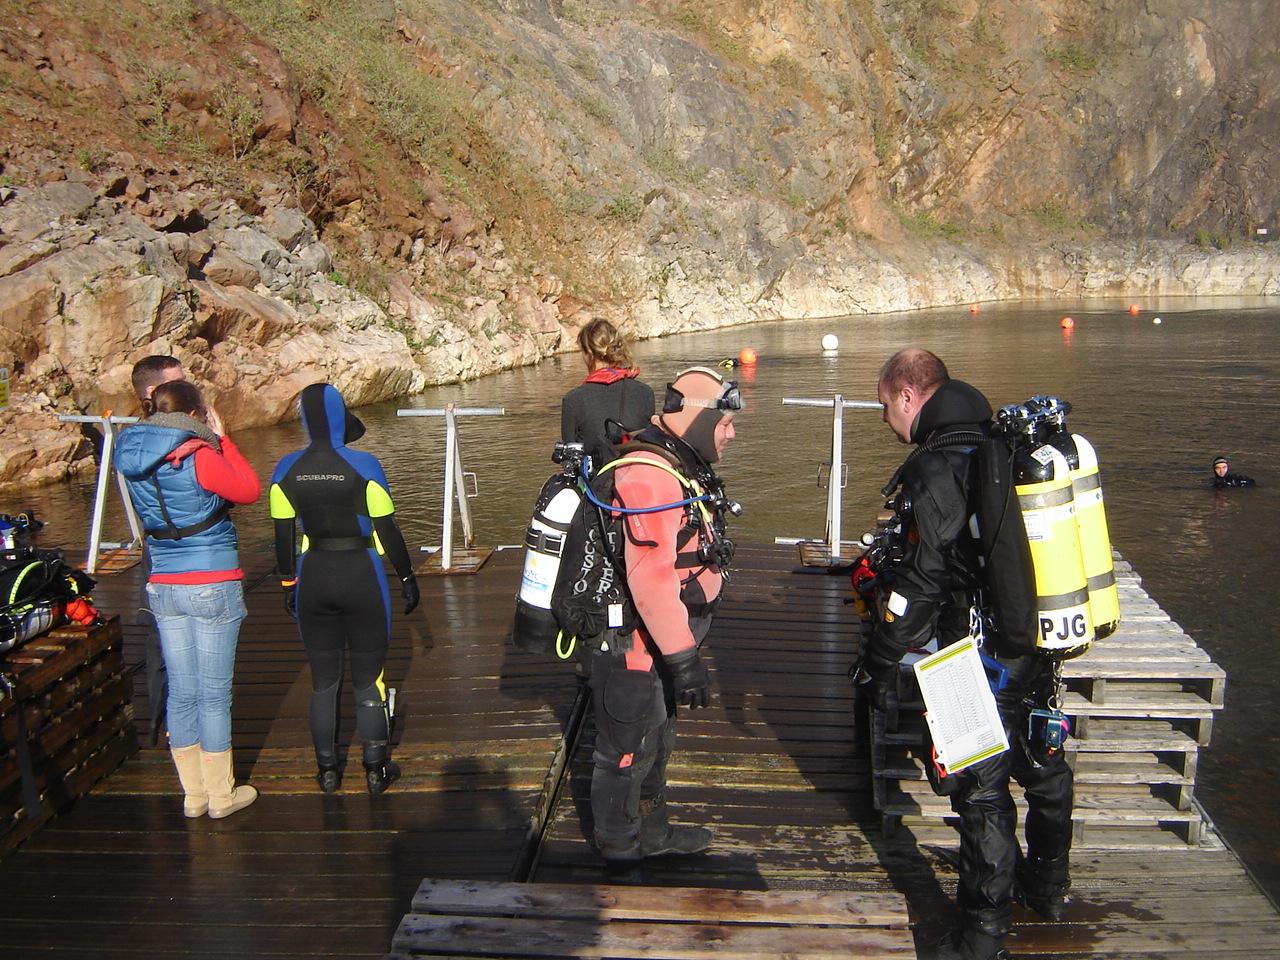 Underwater sites in a disused quarry in South Wales, details of which can be found at the National Diving and Activity Centre, Tidenham near Chepstow: